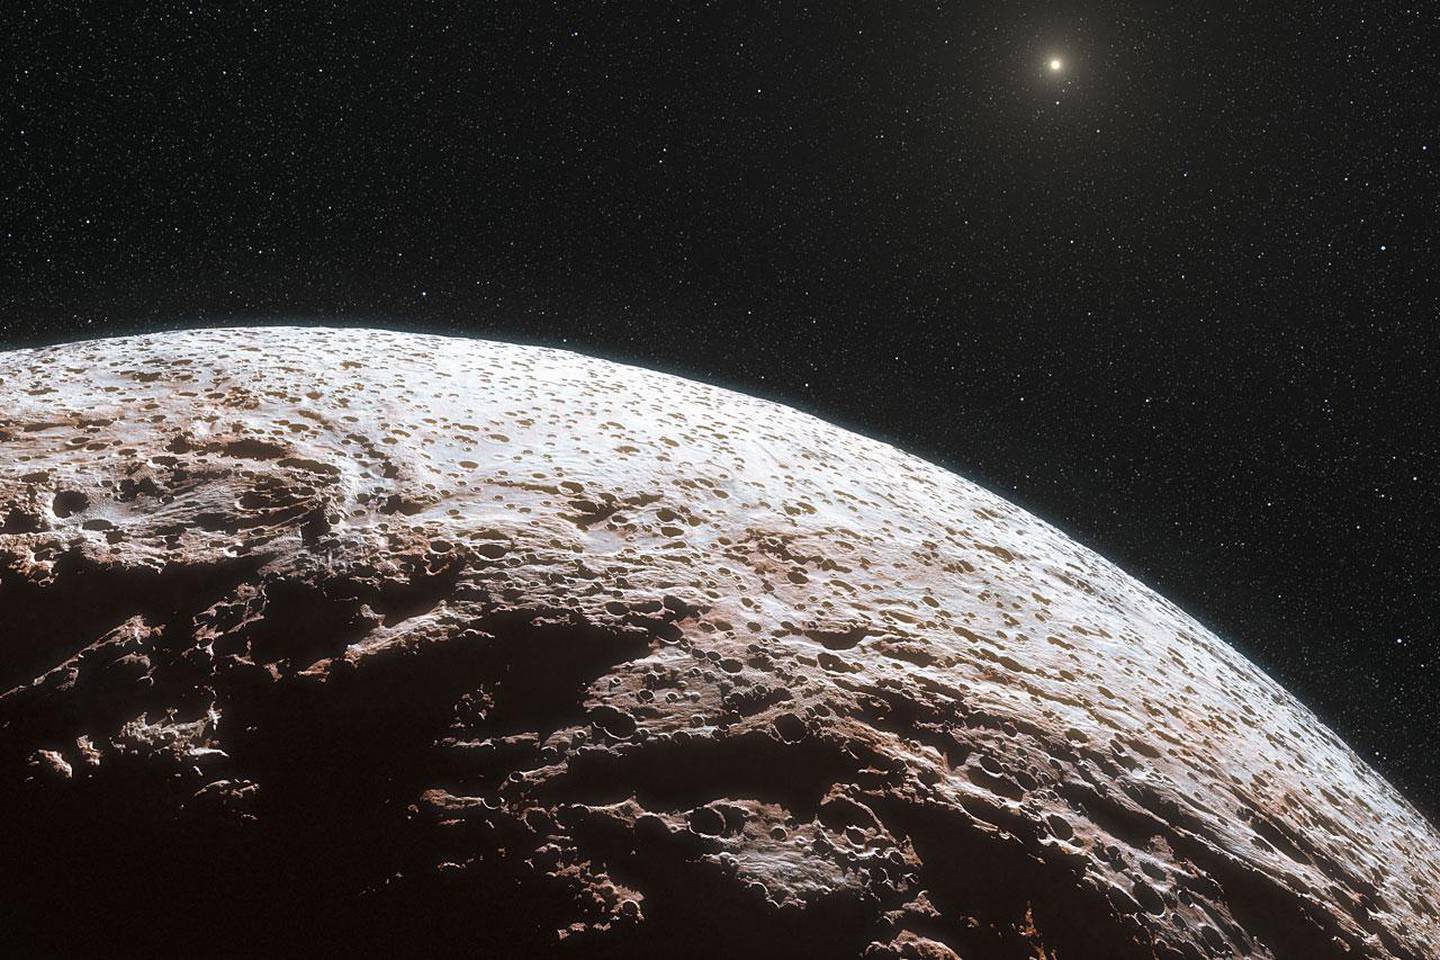 EMBARGOED UNTIL 1 P.M. EDT, WEDNESDAY, NOV. 21, 2012 - This artist impression provided by the European Southern Observatory and the journal Nature, shows the surface of the distant dwarf planet Makemake. This dwarf planet is about two thirds of the size of Pluto, and travels around the Sun in a distant path that lies beyond that of Pluto, but closer to the Sun than Eris, the most massive known dwarf planet in the Solar System. Astronomers say Pluto's icy more distant sister seems even more alien because they found it doesn't have an atmosphere. Scientists measuring the light signature from Makemake conclude that it doesn't have a global atmosphere. A study in Wednesday's journal Nature said it still may have pockets of atmosphere from methane ice turning into gas.  Makemake is one of our solar system's distant dwarf planets beyond Neptune. (AP Photo/European Southern Observatory/Nature